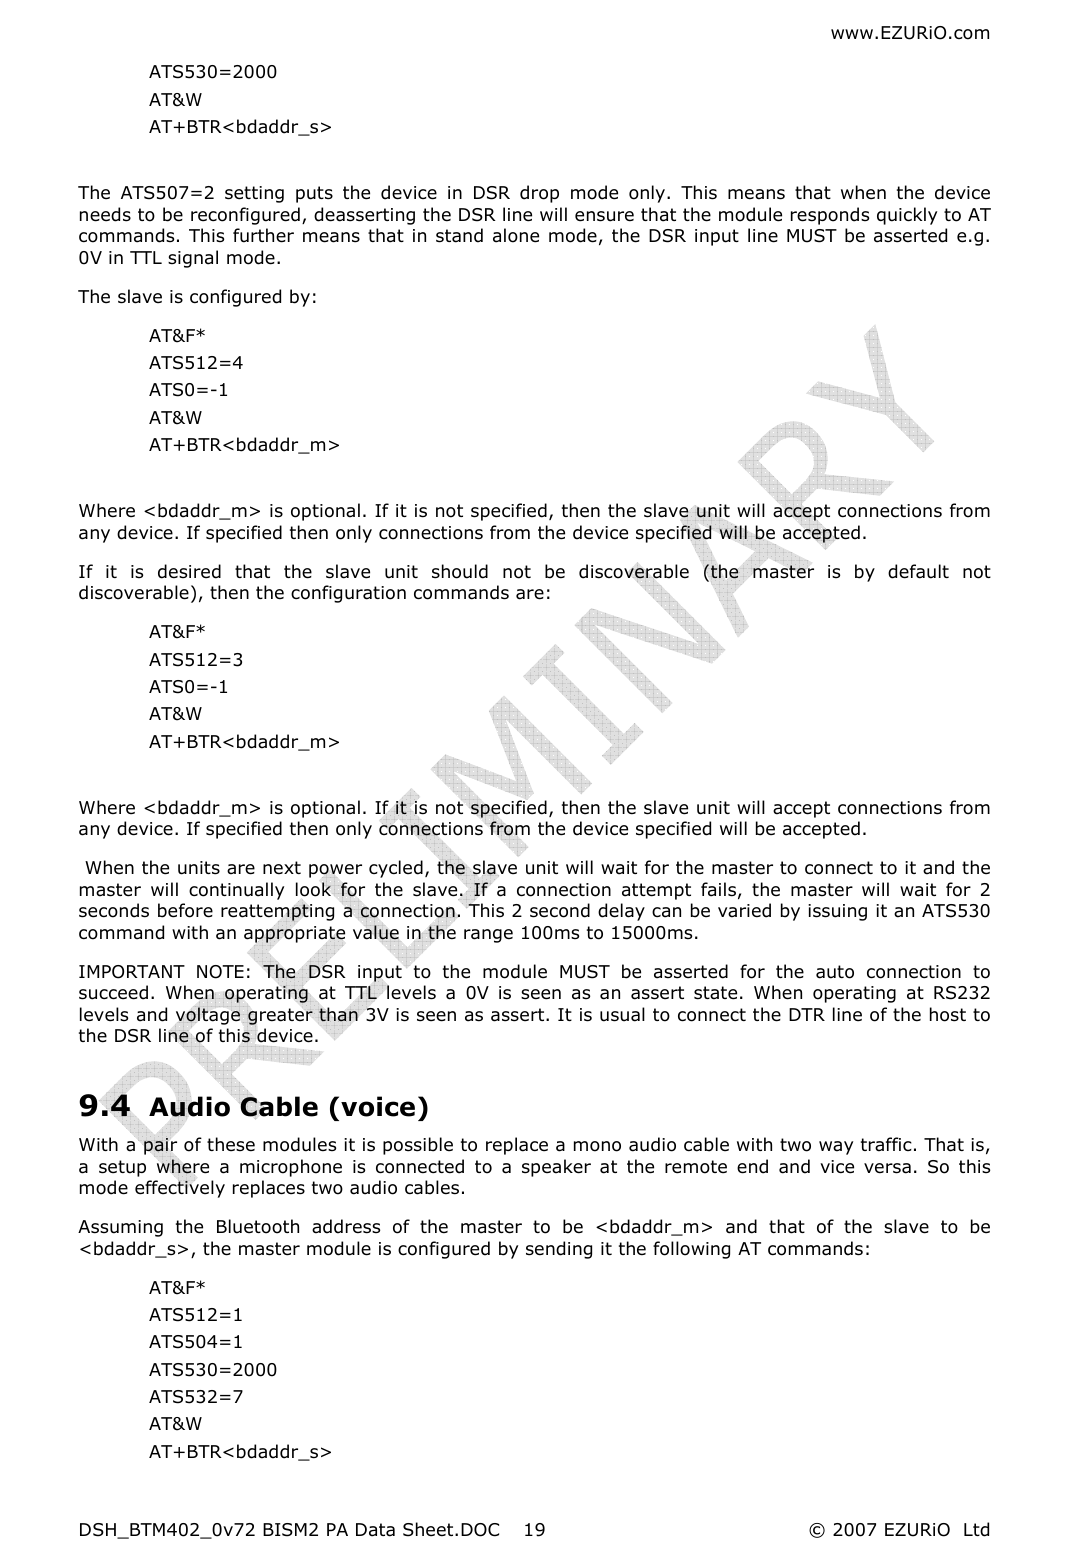 www.EZURiO.com DSH_BTM402_0v72 BISM2 PA Data Sheet.DOC  © 2007 EZURiO  Ltd  19ATS530=2000 AT&amp;W AT+BTR&lt;bdaddr_s&gt;  The  ATS507=2  setting  puts  the  device  in  DSR  drop  mode  only.  This  means  that  when  the  device needs to be reconfigured, deasserting the DSR line will ensure that the module responds quickly to AT commands. This further means that in stand alone mode, the DSR input line MUST be asserted e.g. 0V in TTL signal mode. The slave is configured by: AT&amp;F* ATS512=4 ATS0=-1 AT&amp;W AT+BTR&lt;bdaddr_m&gt;  Where &lt;bdaddr_m&gt; is optional. If it is not specified, then the slave unit will accept connections from any device. If specified then only connections from the device specified will be accepted. If  it  is  desired  that  the  slave  unit  should  not  be  discoverable  (the  master  is  by  default  not discoverable), then the configuration commands are: AT&amp;F* ATS512=3 ATS0=-1 AT&amp;W AT+BTR&lt;bdaddr_m&gt;  Where &lt;bdaddr_m&gt; is optional. If it is not specified, then the slave unit will accept connections from any device. If specified then only connections from the device specified will be accepted.  When the units are next power cycled, the slave unit will wait for the master to connect to it and the master  will  continually  look  for  the  slave.  If  a  connection  attempt  fails,  the  master  will  wait  for  2 seconds before reattempting a connection. This 2 second delay can be varied by issuing it an ATS530 command with an appropriate value in the range 100ms to 15000ms. IMPORTANT  NOTE:  The  DSR  input  to  the  module  MUST  be  asserted  for  the  auto  connection  to succeed.  When  operating  at  TTL  levels  a  0V  is  seen  as  an  assert  state.  When  operating  at  RS232 levels and voltage greater than 3V is seen as assert. It is usual to connect the DTR line of the host to the DSR line of this device. 9.4 Audio Cable (voice) With a pair of these modules it is possible to replace a mono audio cable with two way traffic. That is, a  setup  where  a  microphone  is  connected  to  a  speaker  at  the  remote  end  and  vice  versa.  So  this mode effectively replaces two audio cables. Assuming  the  Bluetooth  address  of  the  master  to  be  &lt;bdaddr_m&gt;  and  that  of  the  slave  to  be &lt;bdaddr_s&gt;, the master module is configured by sending it the following AT commands: AT&amp;F* ATS512=1 ATS504=1 ATS530=2000 ATS532=7 AT&amp;W AT+BTR&lt;bdaddr_s&gt; 